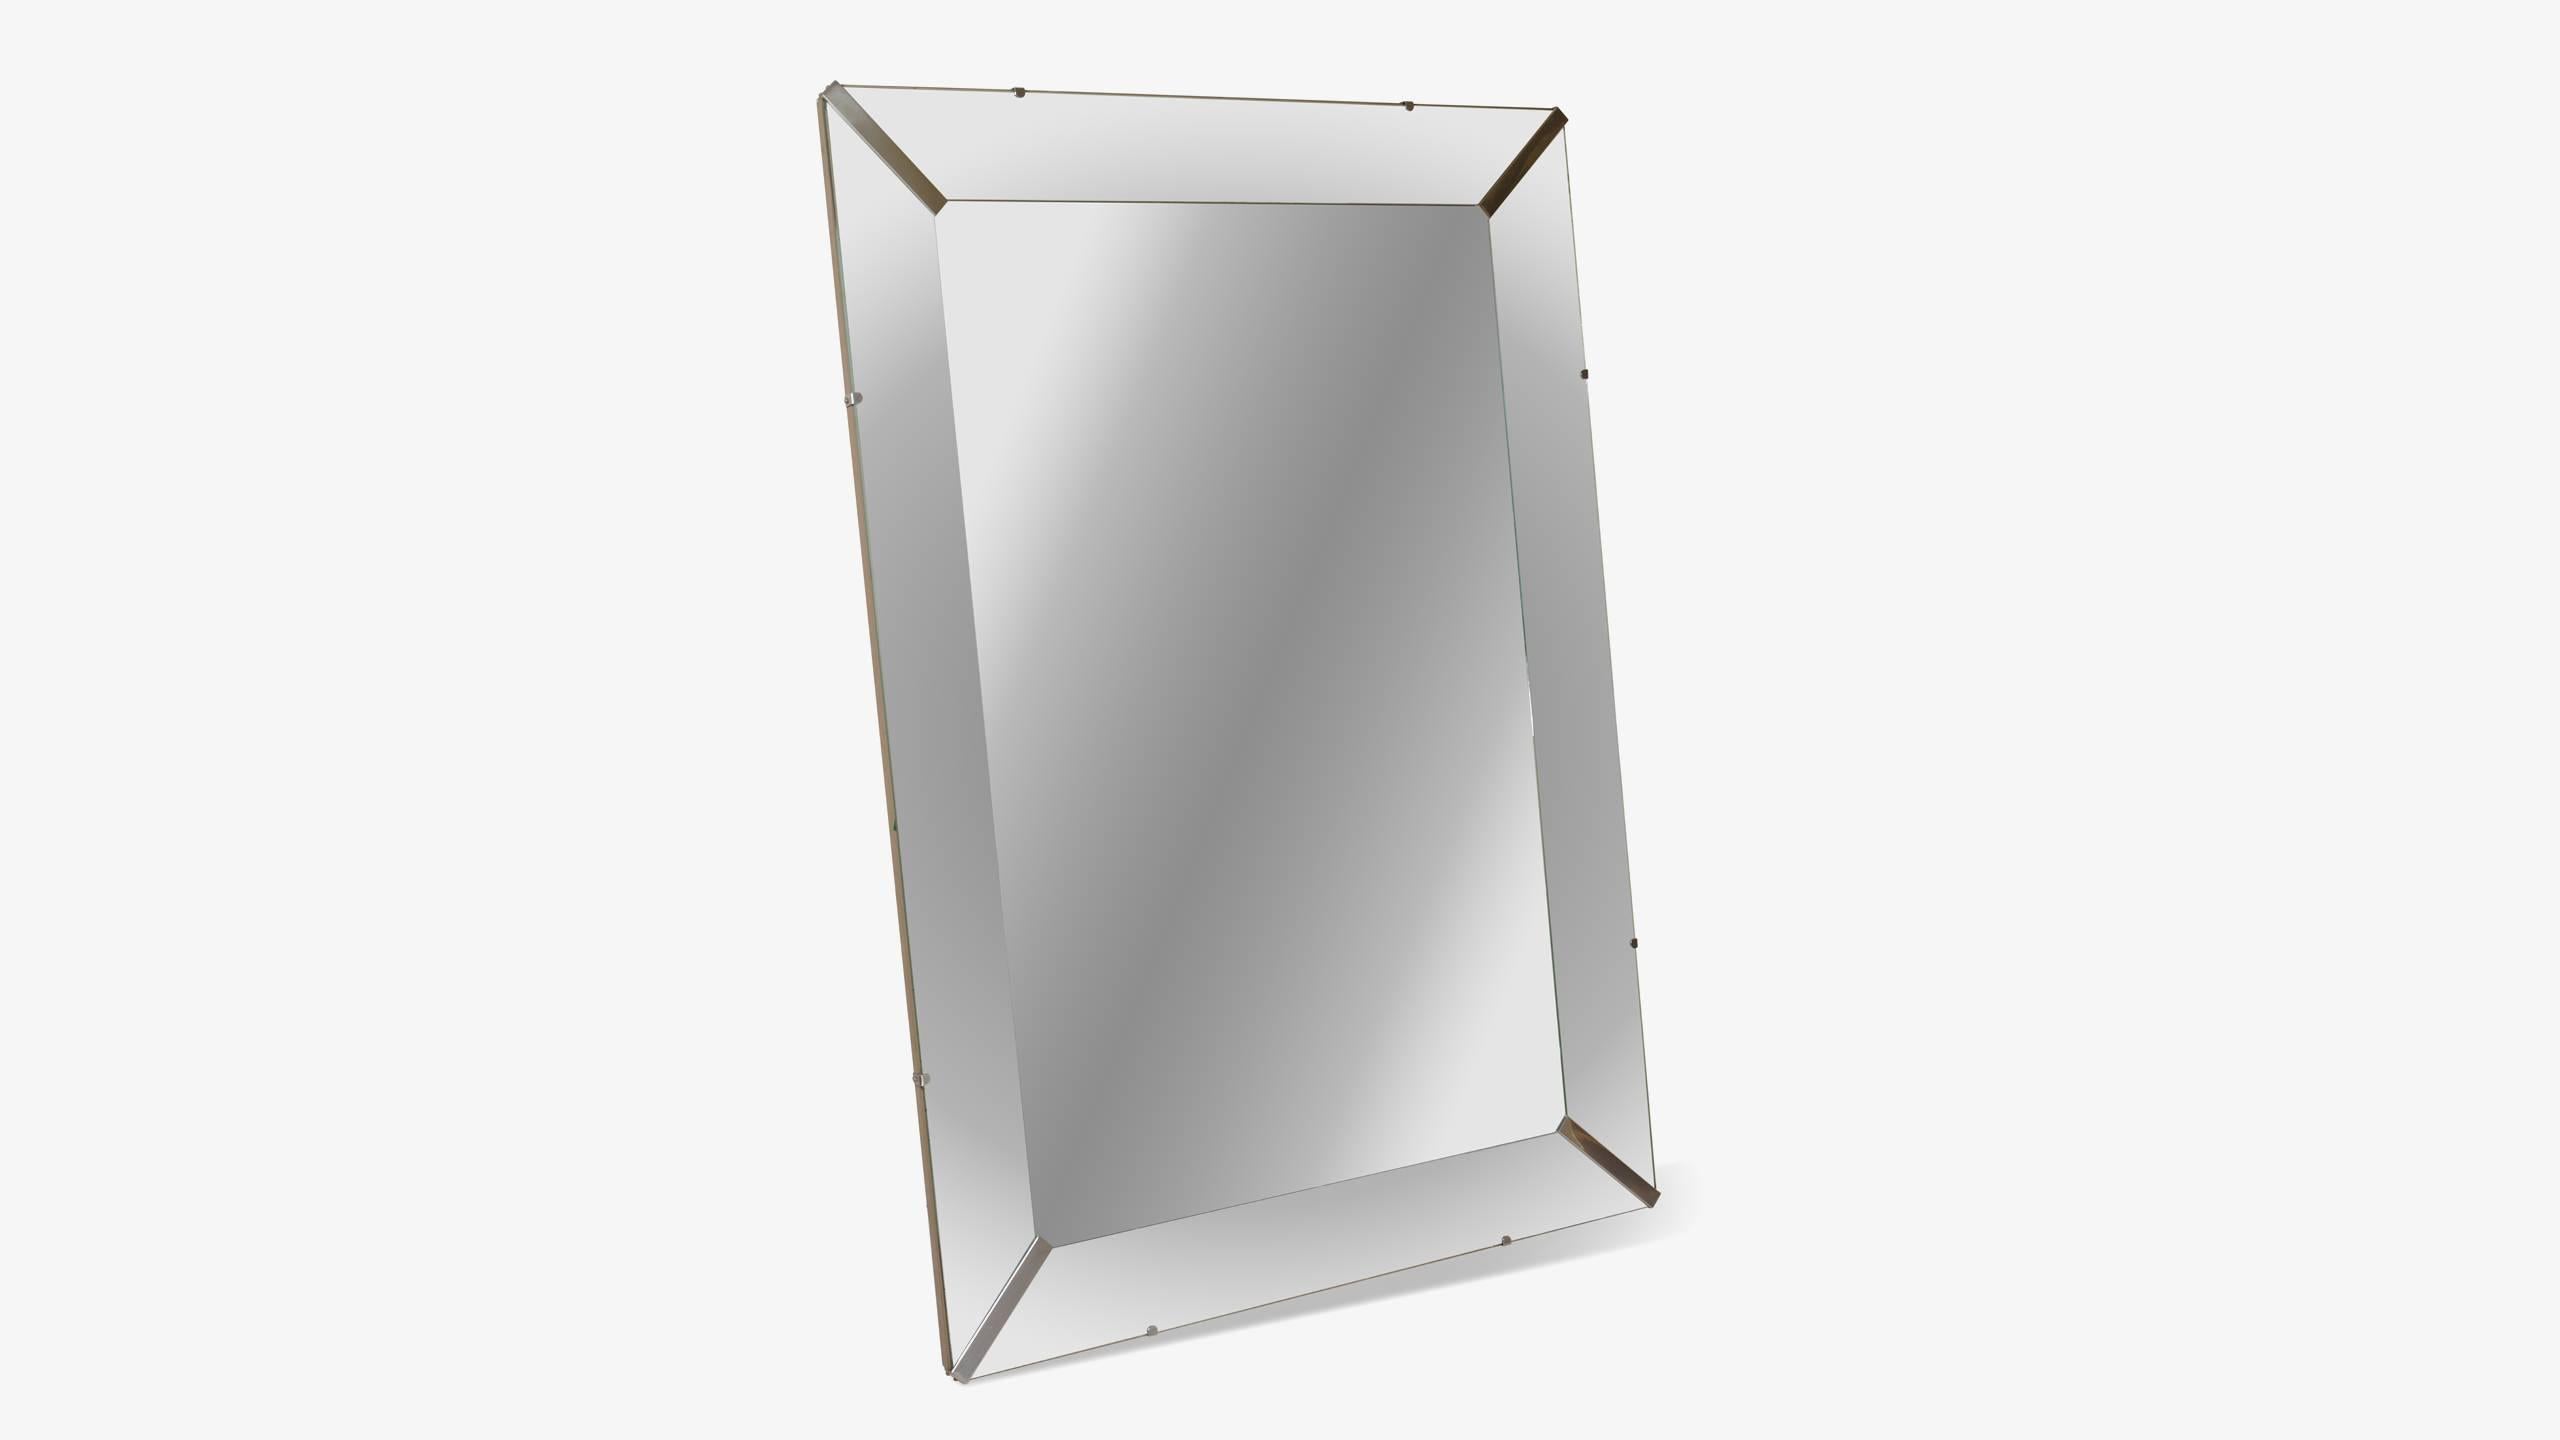 A timeless design scaled up to a colossal size. This impressively proportioned mirror is a stunning addition to a grand foyer or a dining room. With the ability to be wall-mounted in either portrait or landscape, the uses for this mirror are